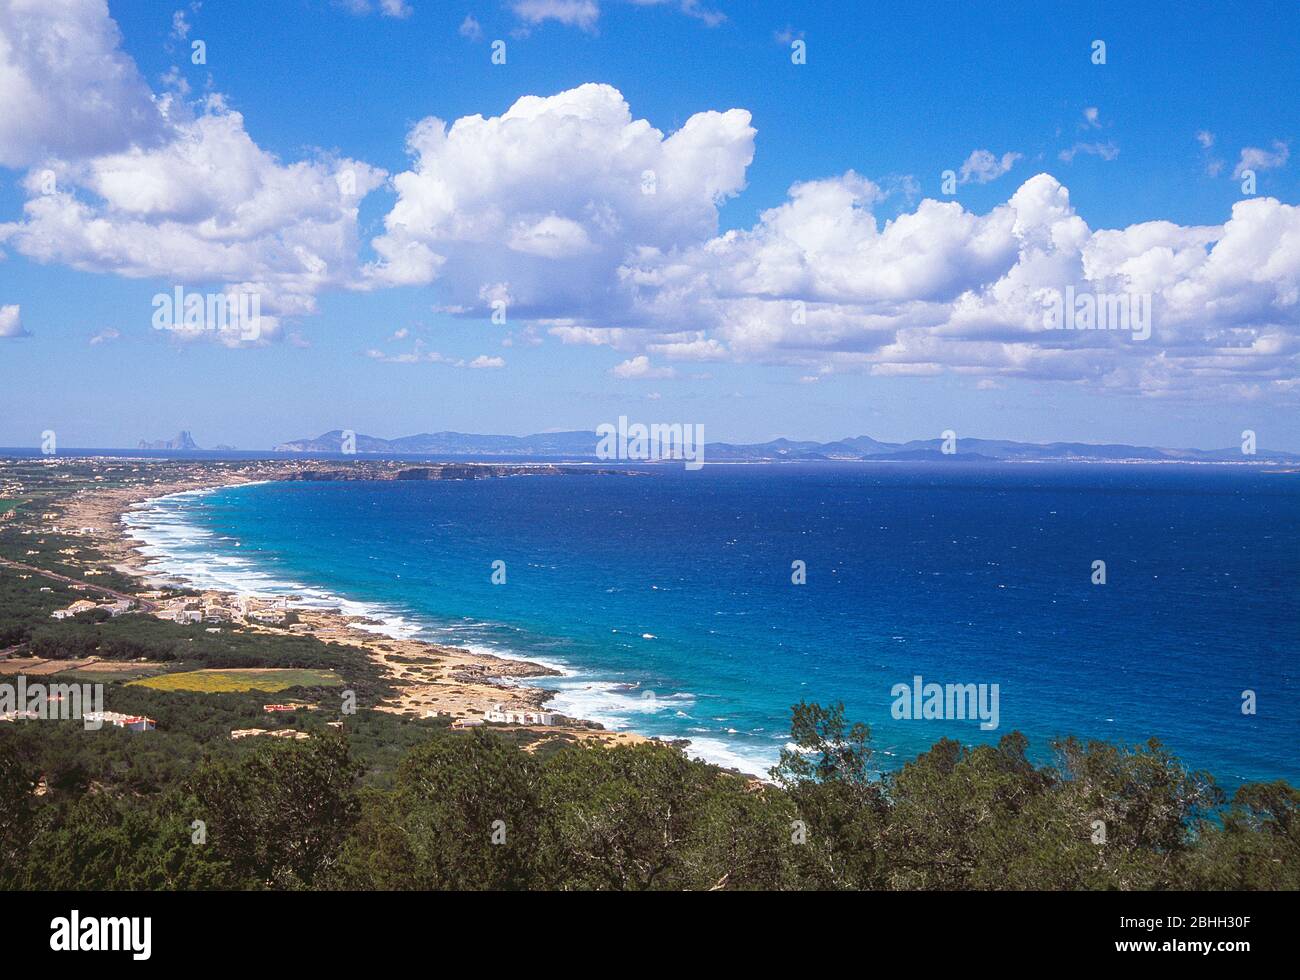 Overview of Es Calo and Tramuntana beach from La Mola. Formentera, Balearic Islands, Spain. Stock Photo